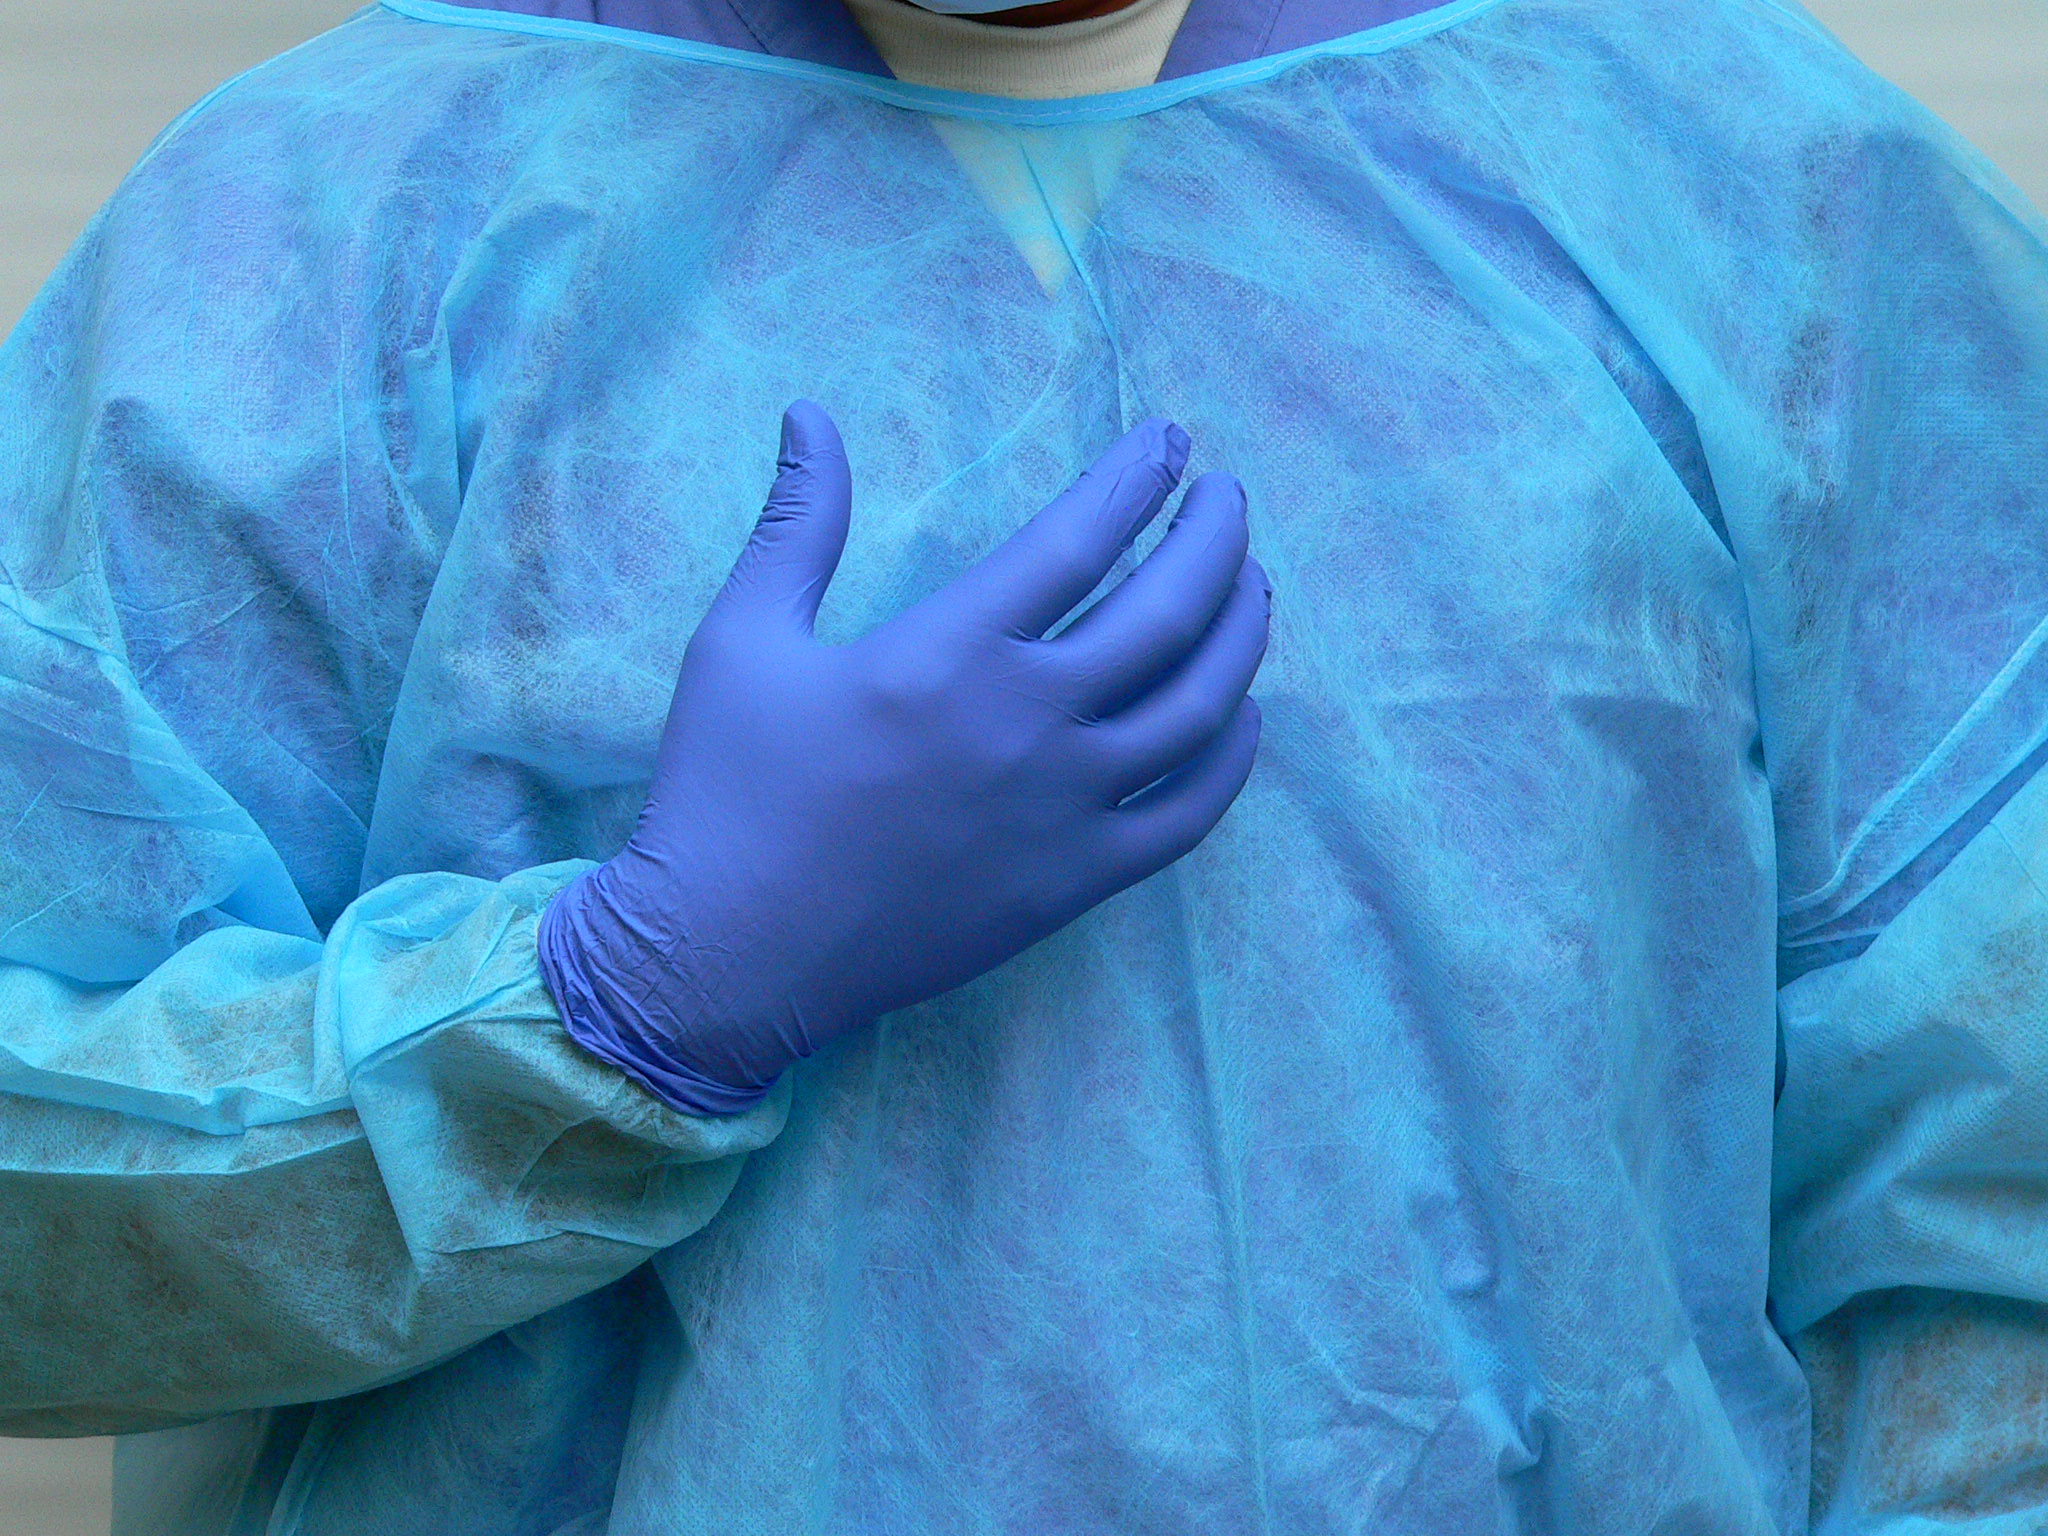 Disposable Blue Fluid-Resistant Polypropylene  Isolation Cover Gowns w/ Elastic Cuffs